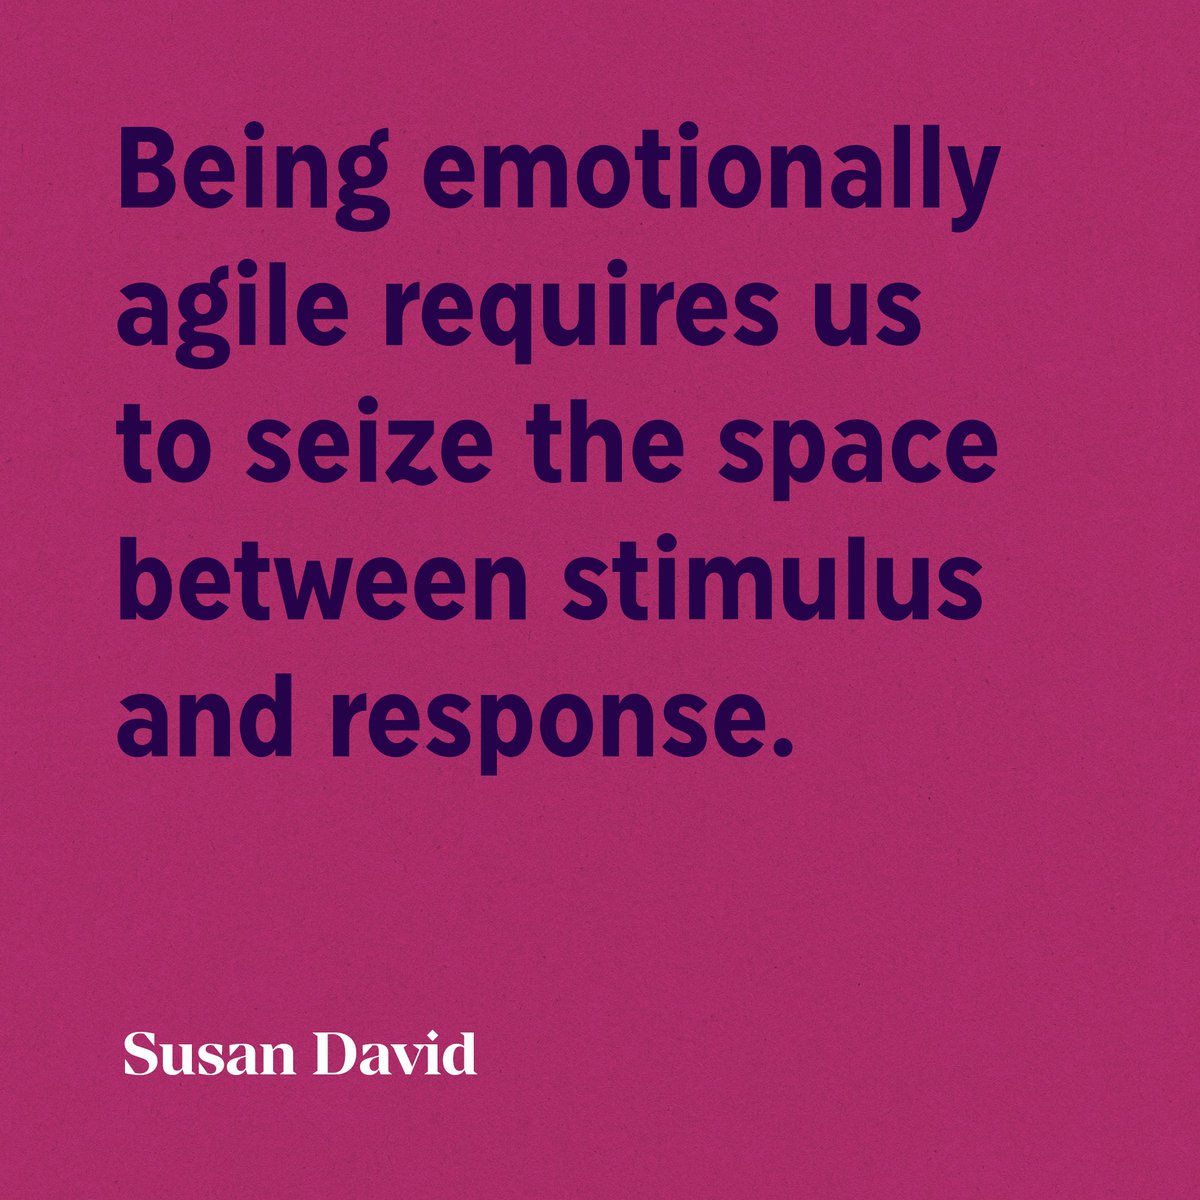 Emotional agility isn’t only about understanding your emotions. It’s about knowing how to slow down and mindfully respond even while you’re experiencing an emotion that’s challenging or uncomfortable.